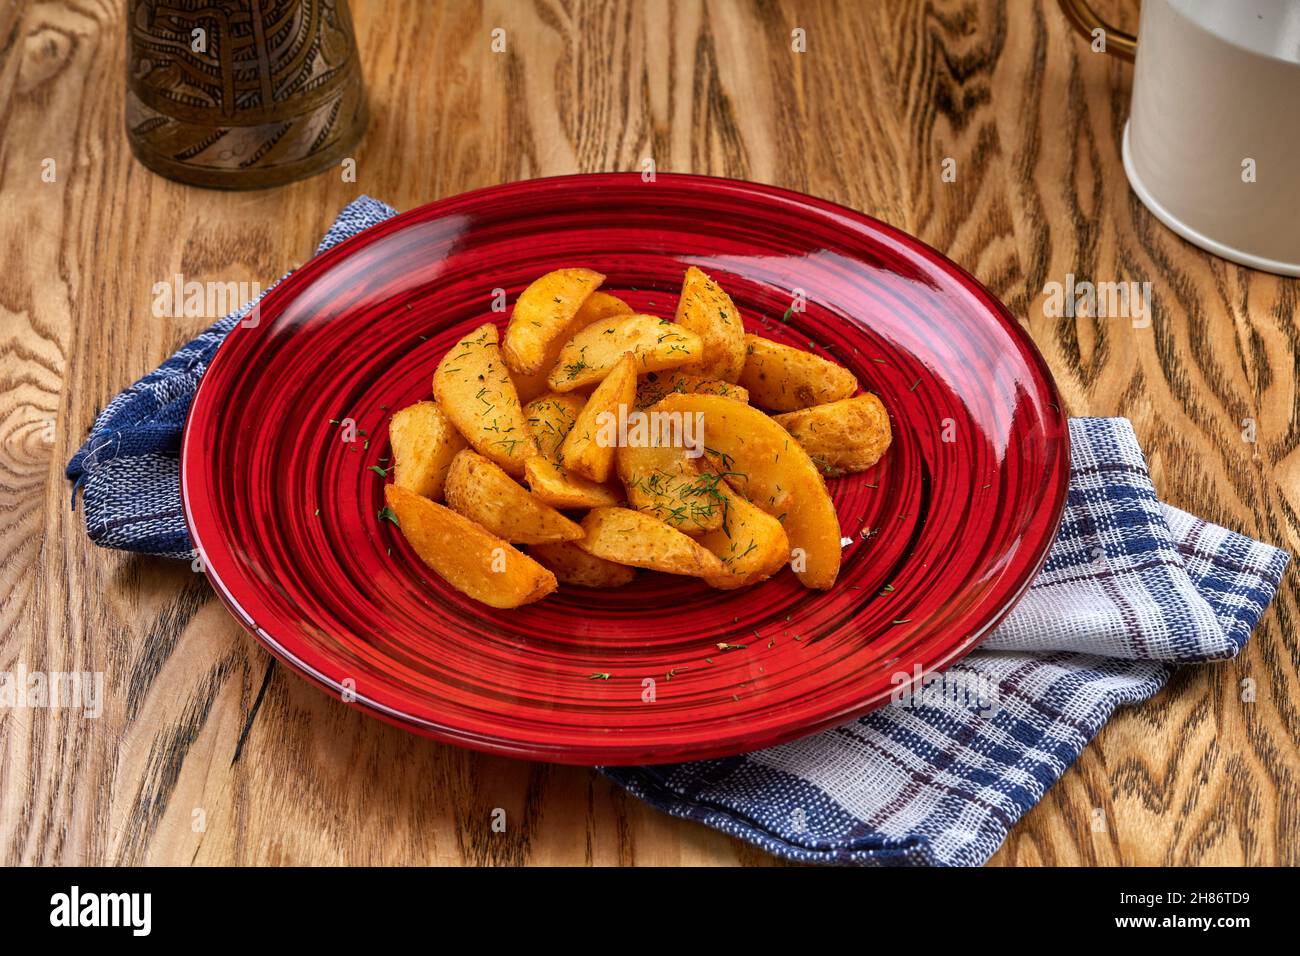 Baked potato wedges with rosemary in red dish, on a blue towel, angle view. Healthy vegan food concept. Stock Photo